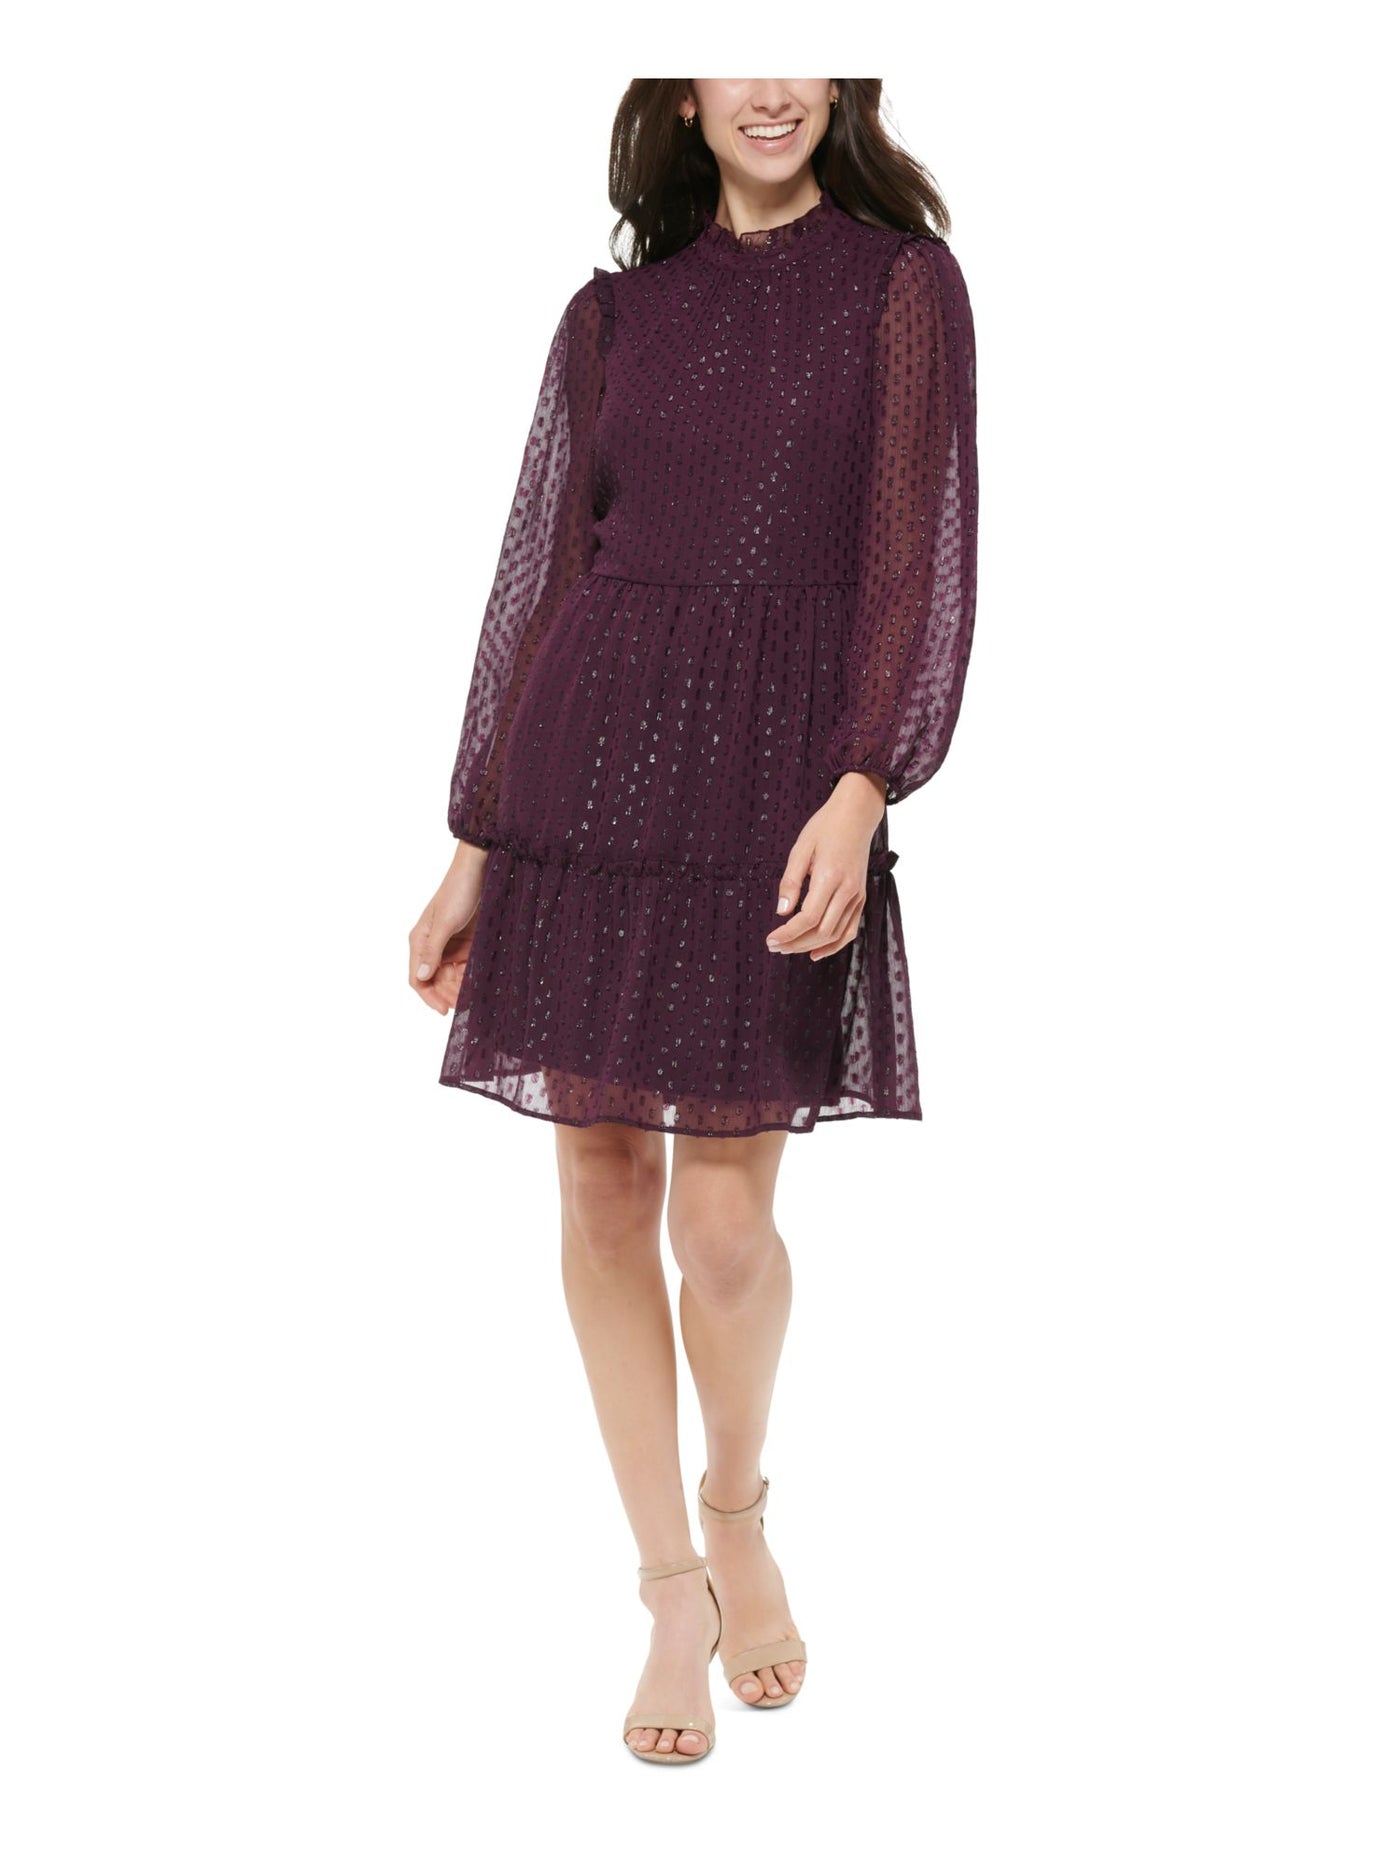 TOMMY HILFIGER Womens Purple Ruffled Long Sleeve Mock Neck Above The Knee Cocktail Shift Dress 14